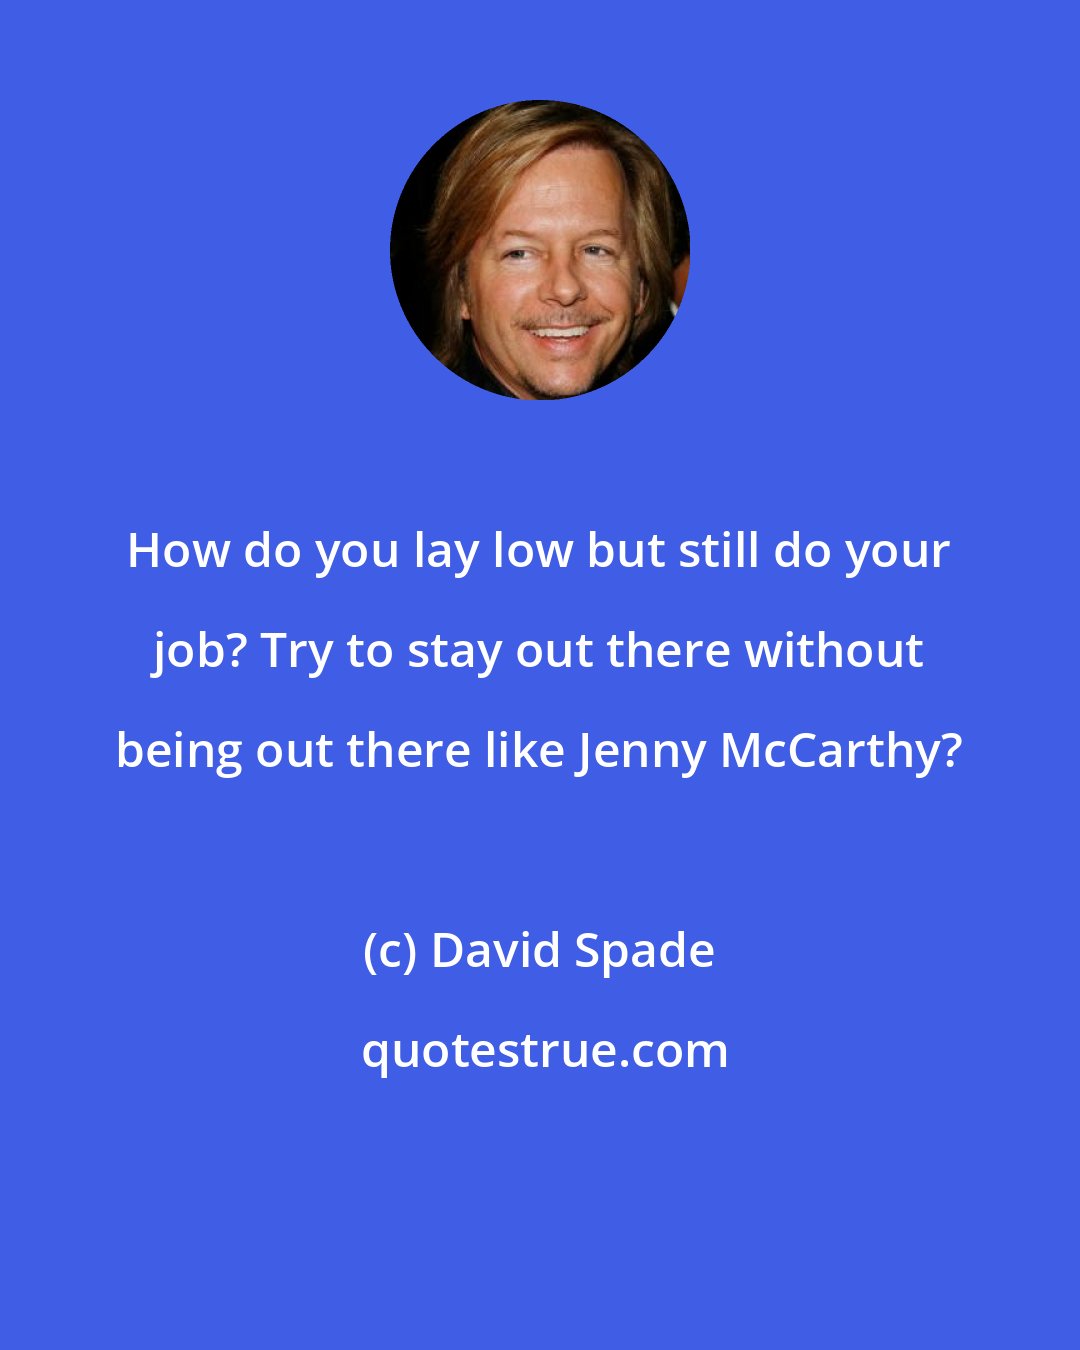 David Spade: How do you lay low but still do your job? Try to stay out there without being out there like Jenny McCarthy?